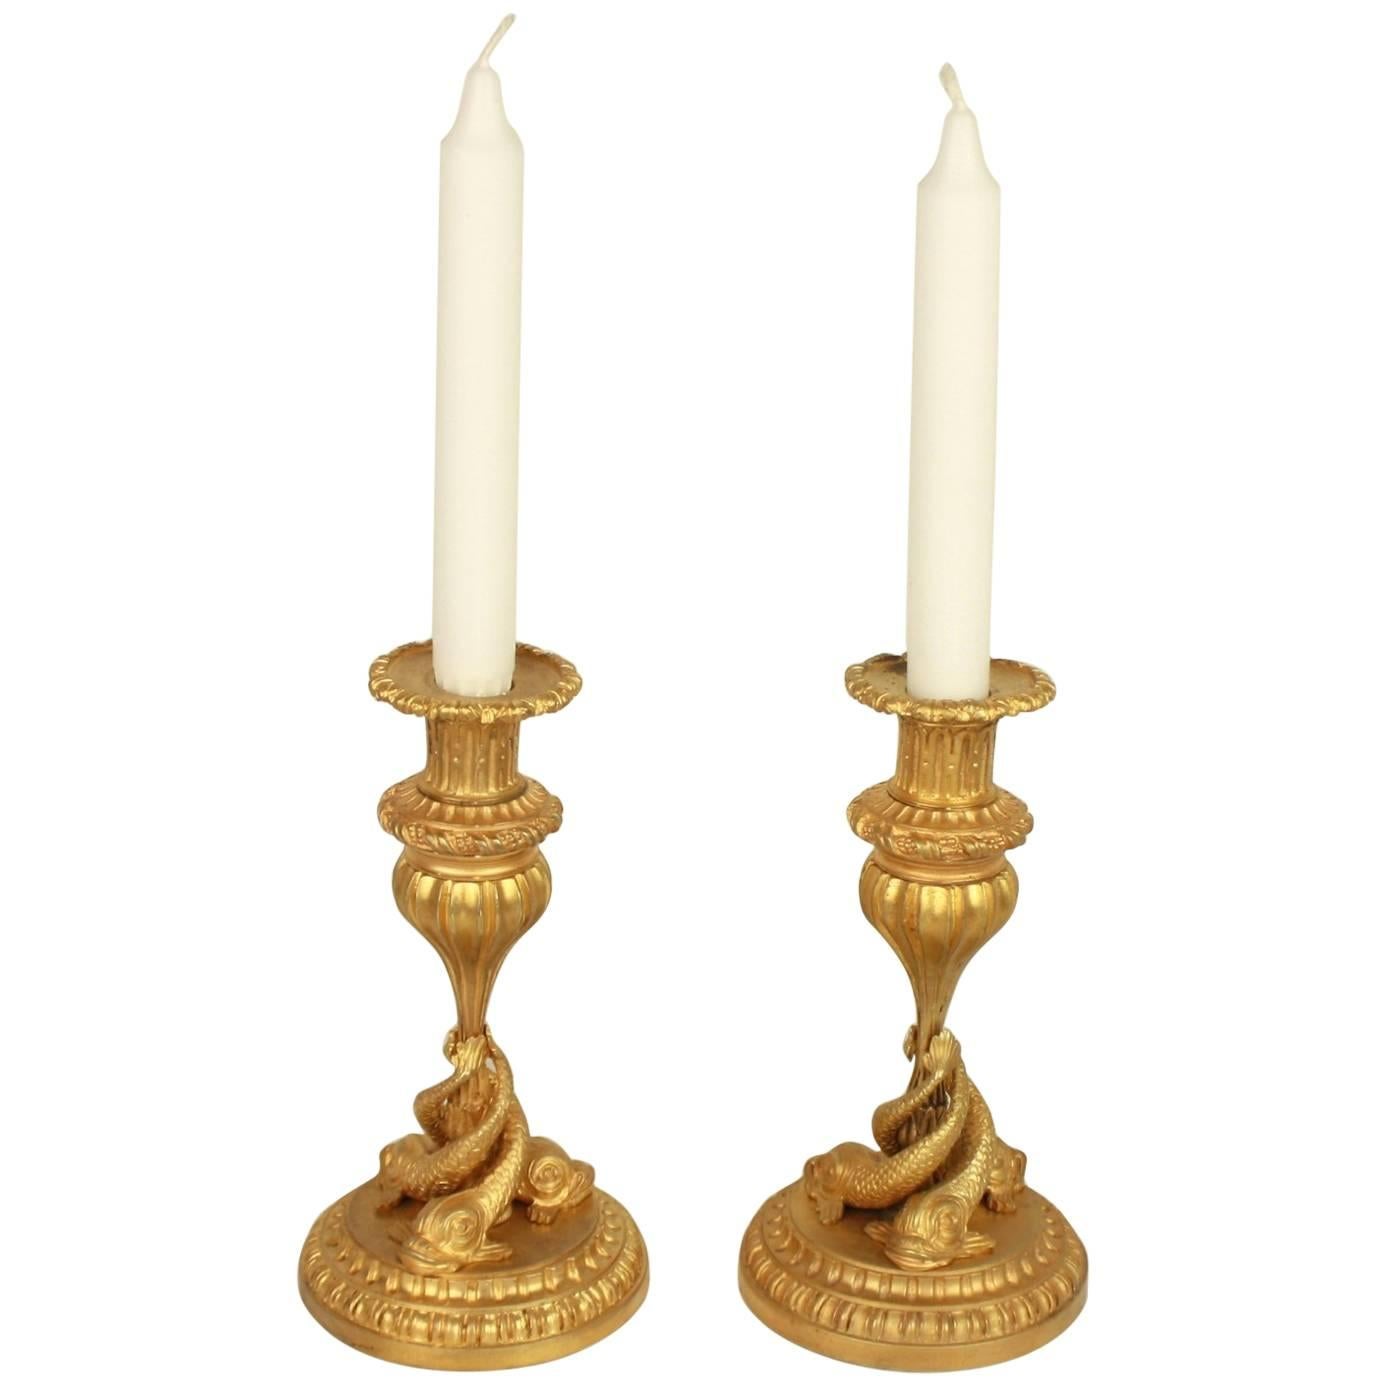 Pair of 19th Century Ormolu Candlesticks with Entwined Dolphins